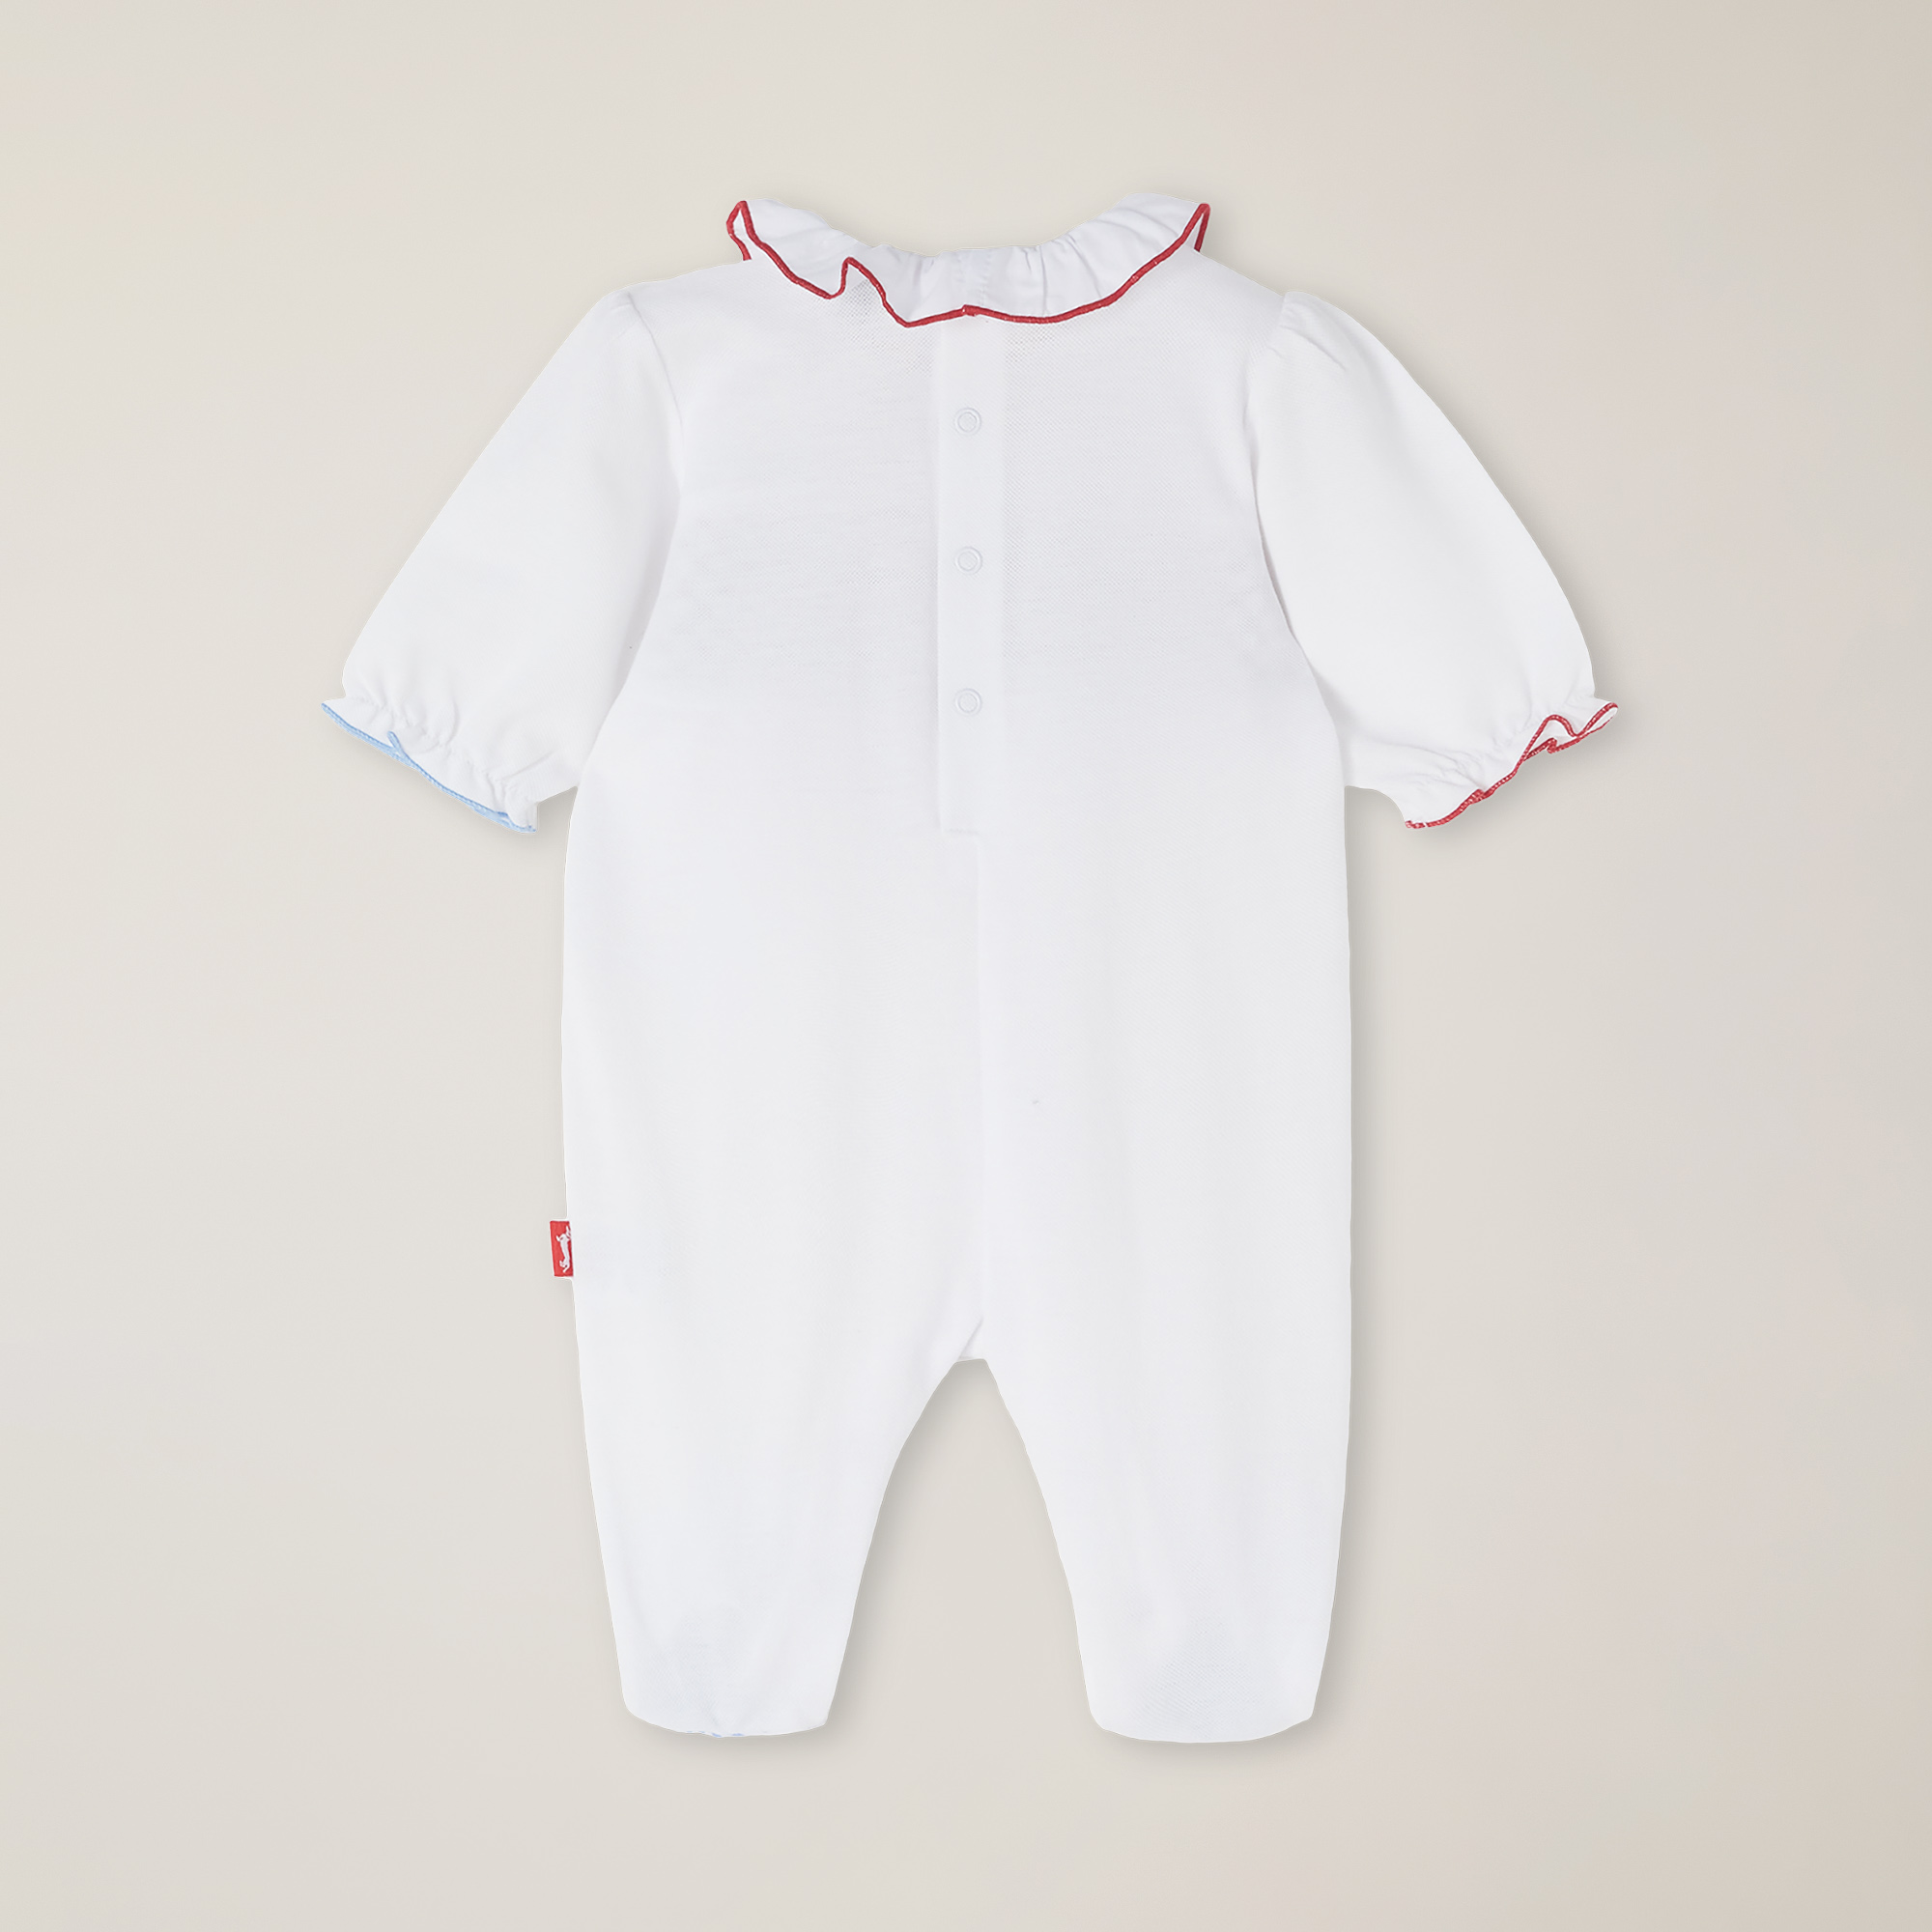 Piqué romper suit with Dachshund embroidery, White, large image number 1